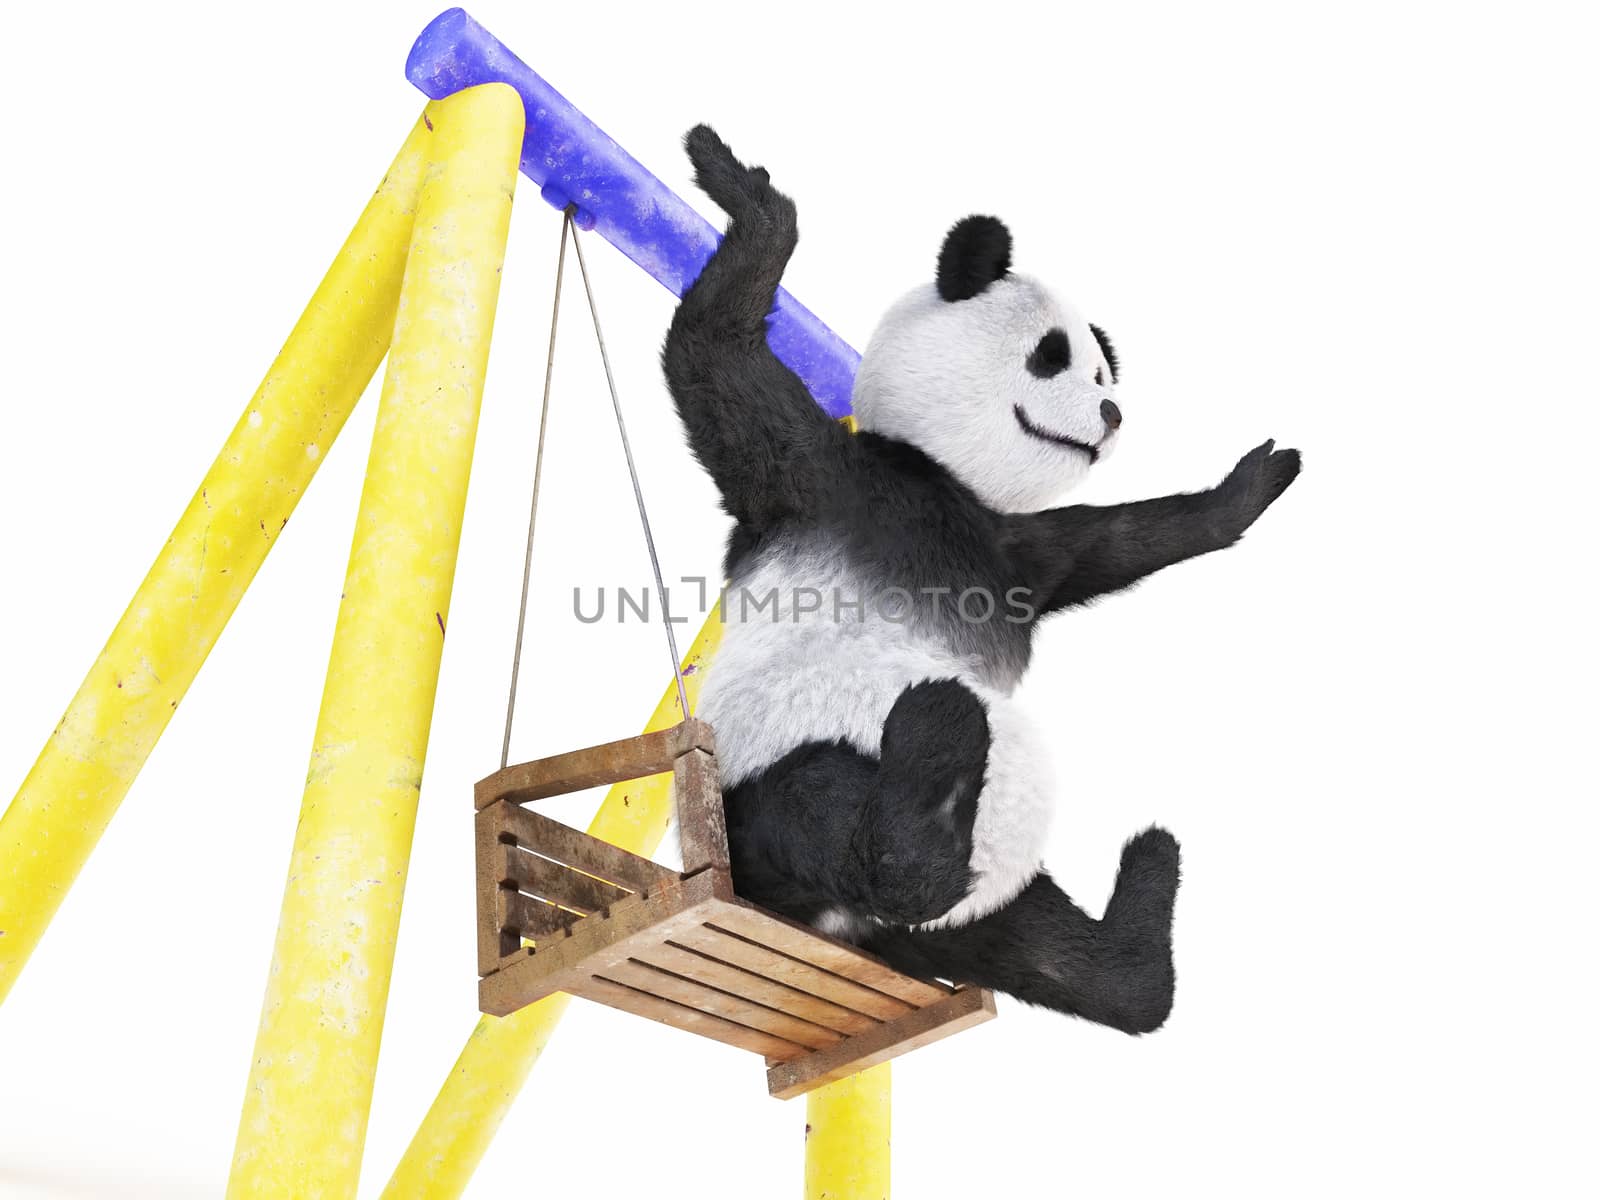 paws spread wide to sides cheerful character panda sitting on swing (yellow-blue seesaw). wobble and get ready to jump off wooden bench. fun cute photo-realistic three-dimensional illustration of mammals